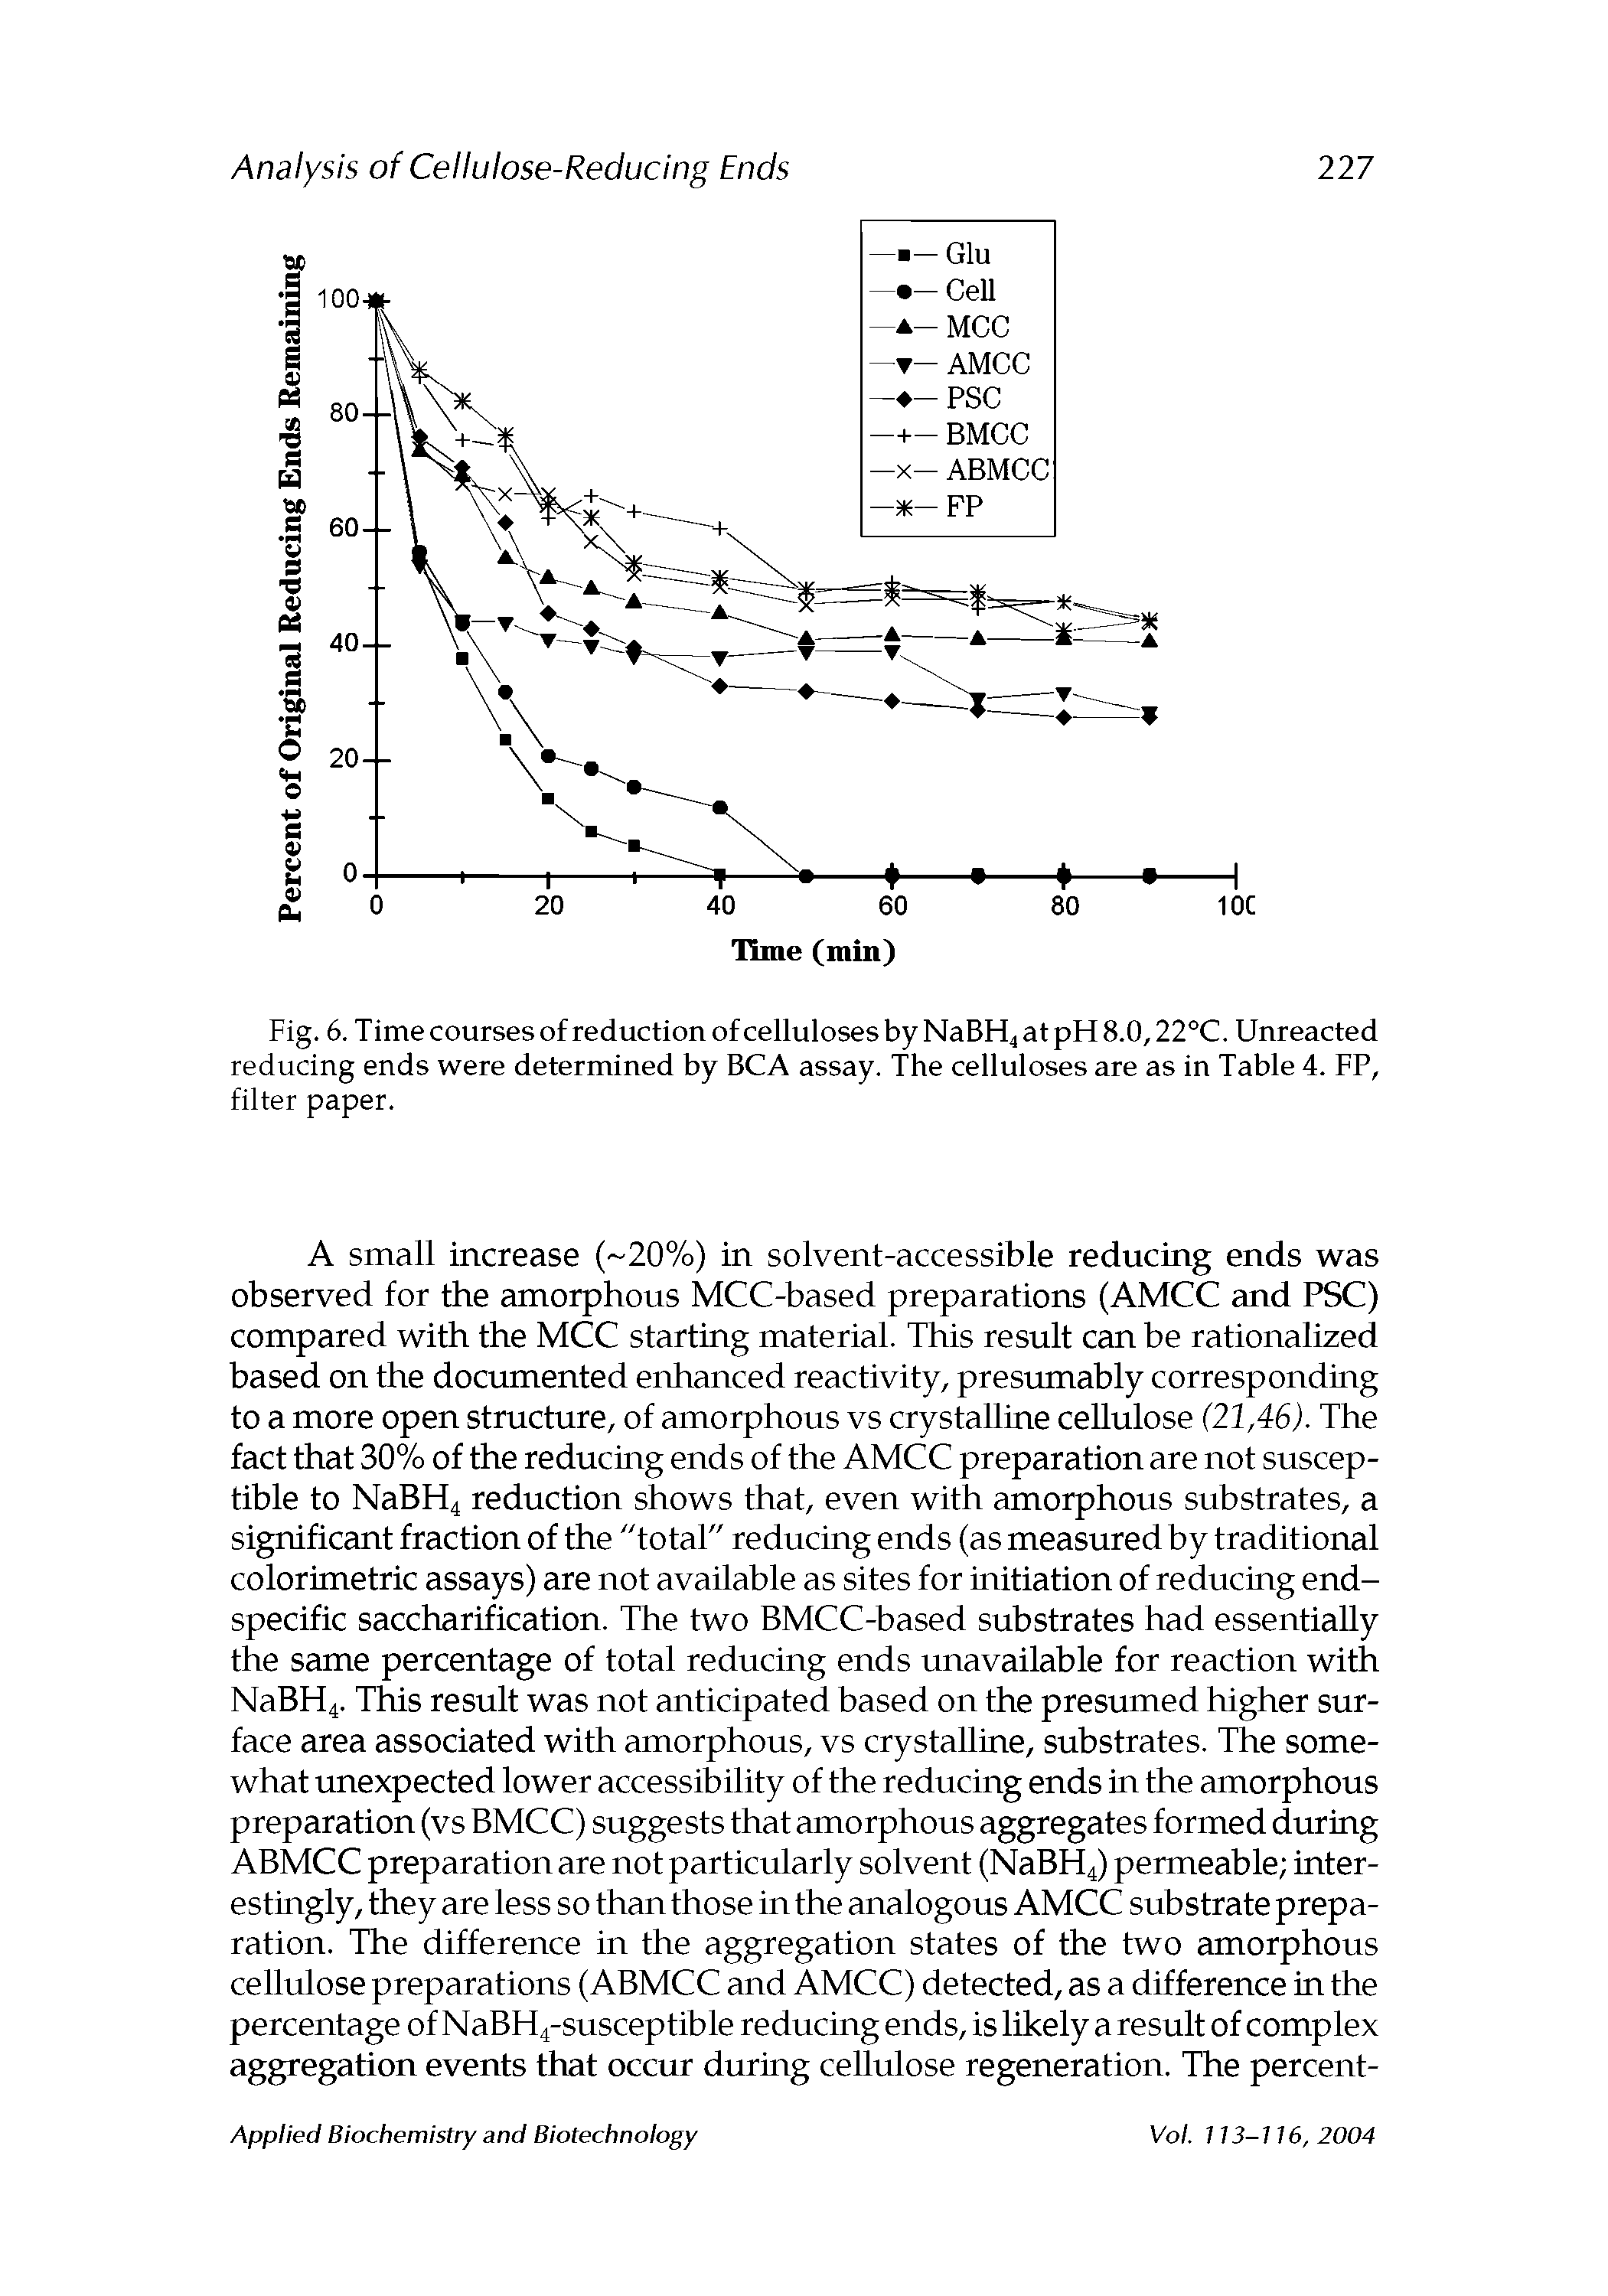 Fig. 6. Time courses of reduction of celluloses by NaBH4 at pH 8.0,22°C. Unreacted reducing ends were determined by BCA assay. The celluloses are as in Table 4. FP, filter paper.